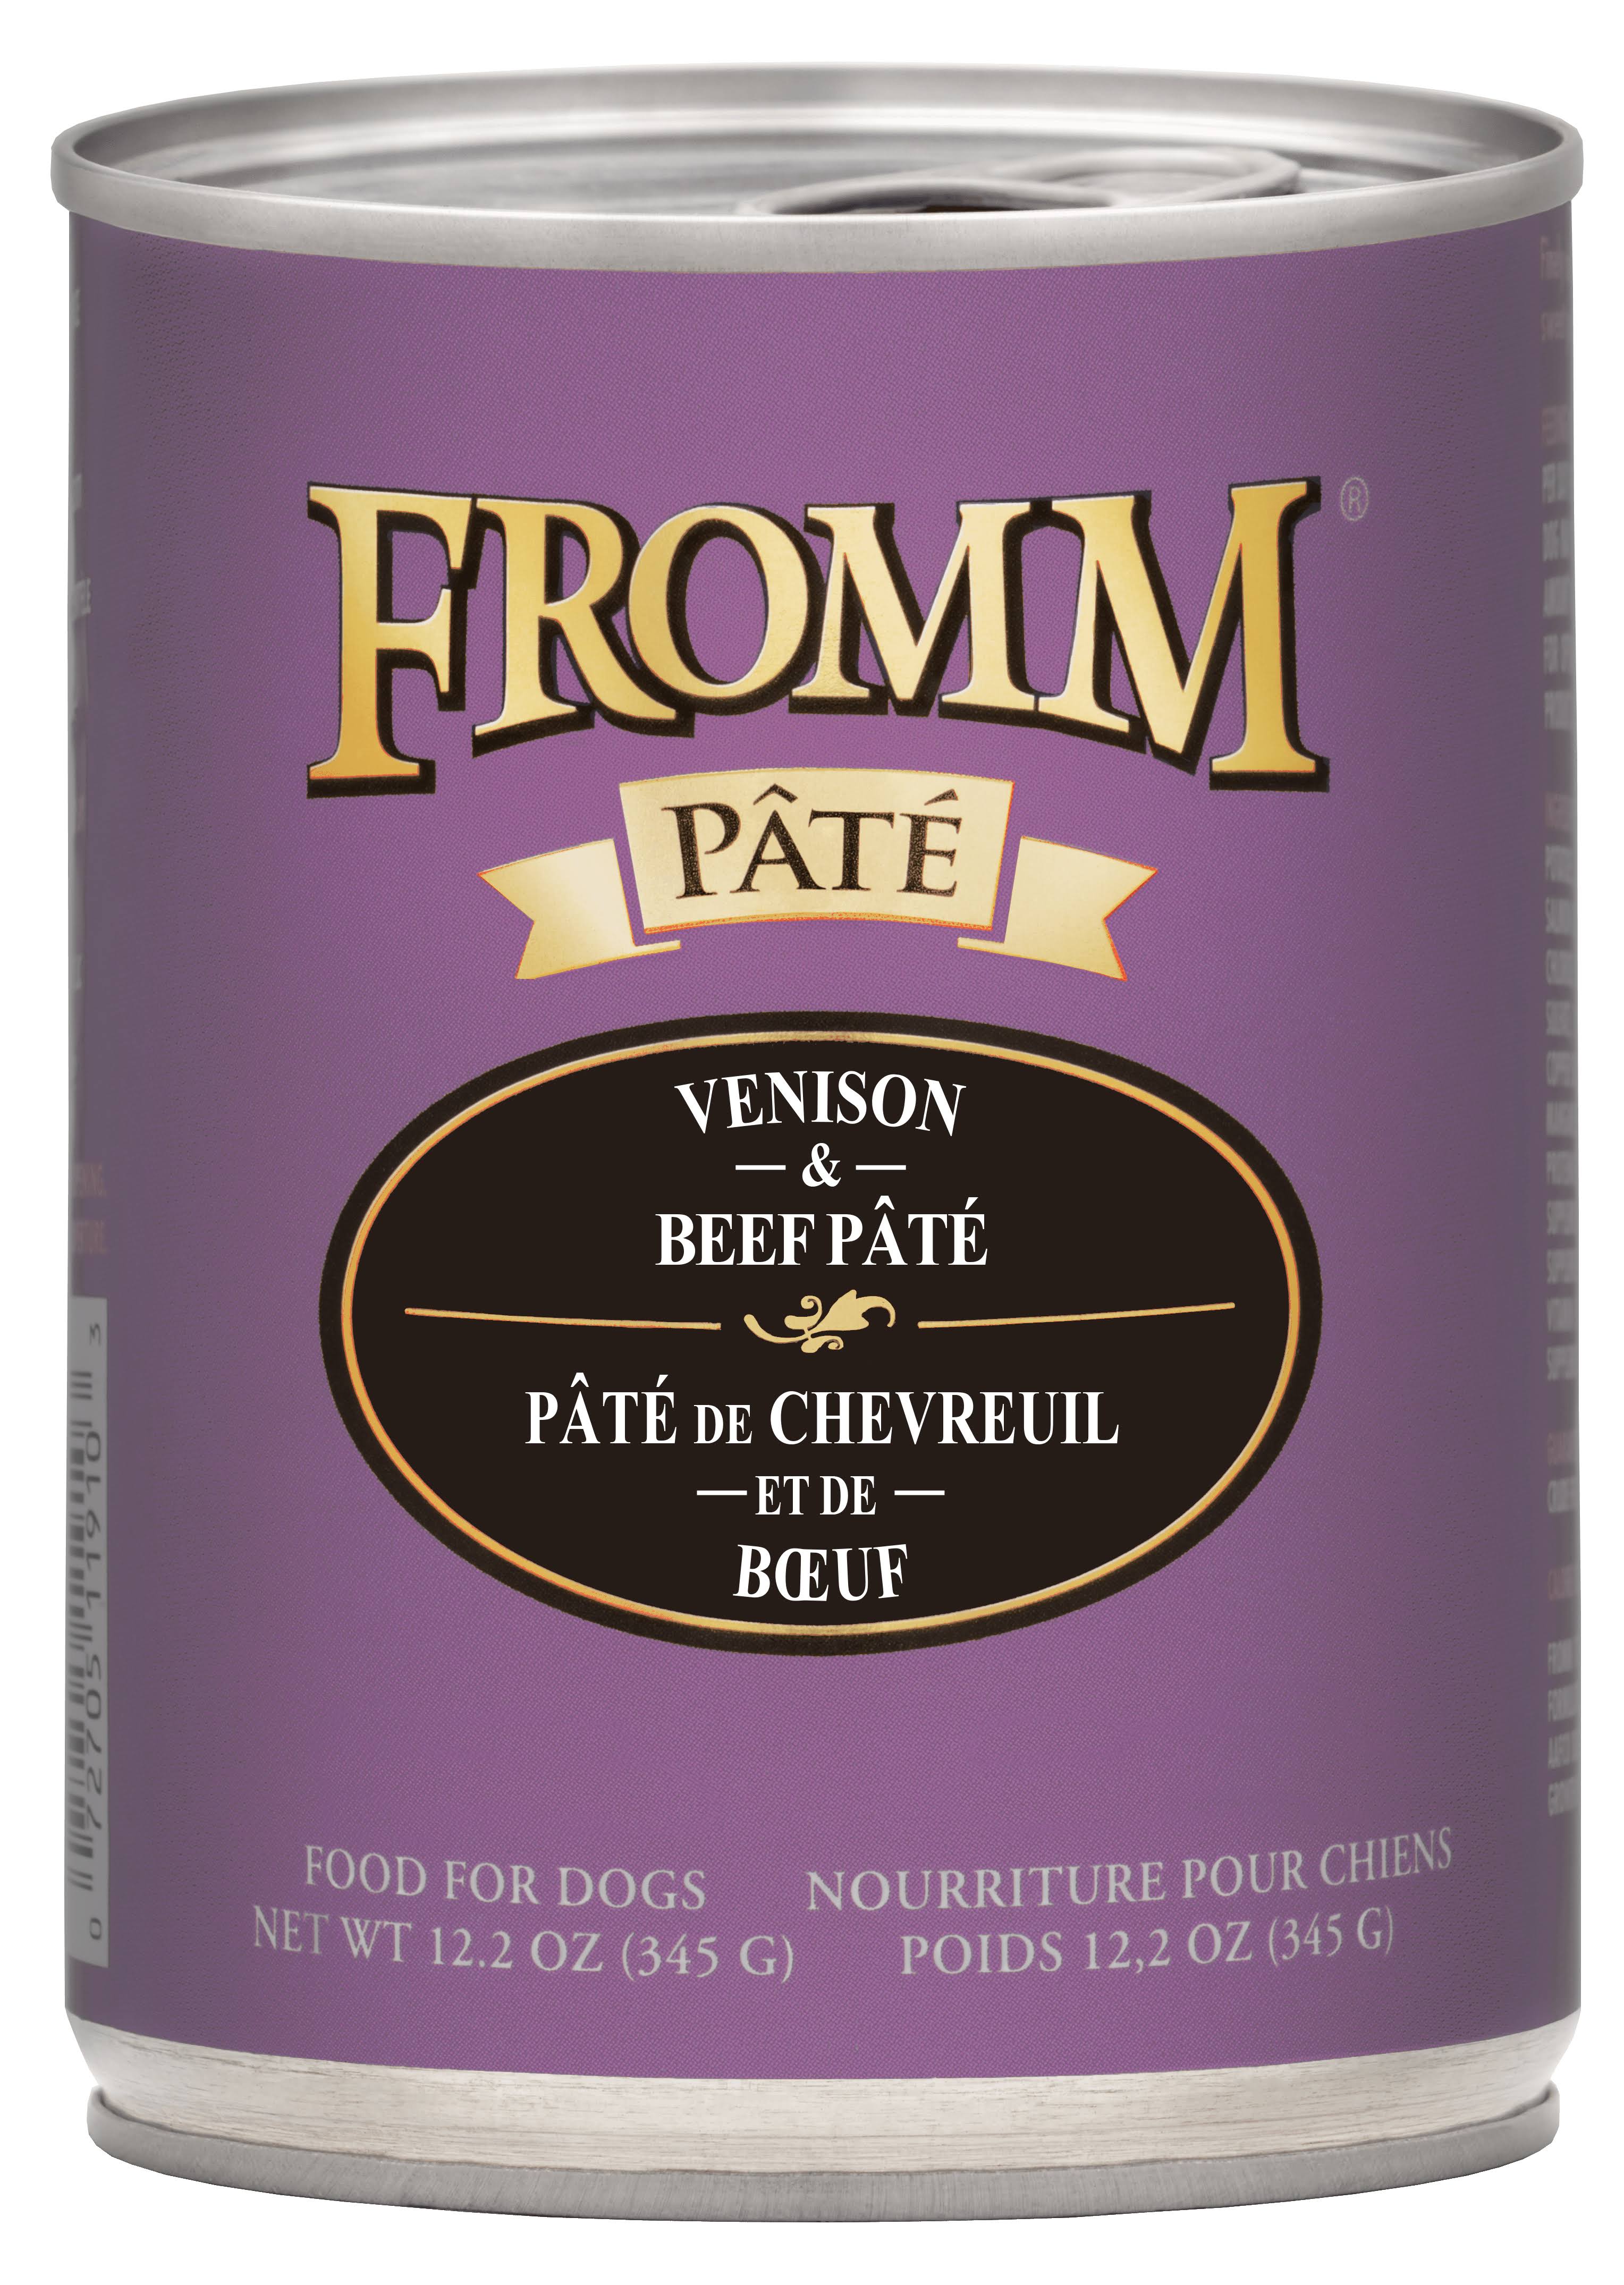 Fromm Gold Venison & Beef Pate Canned Dog Food